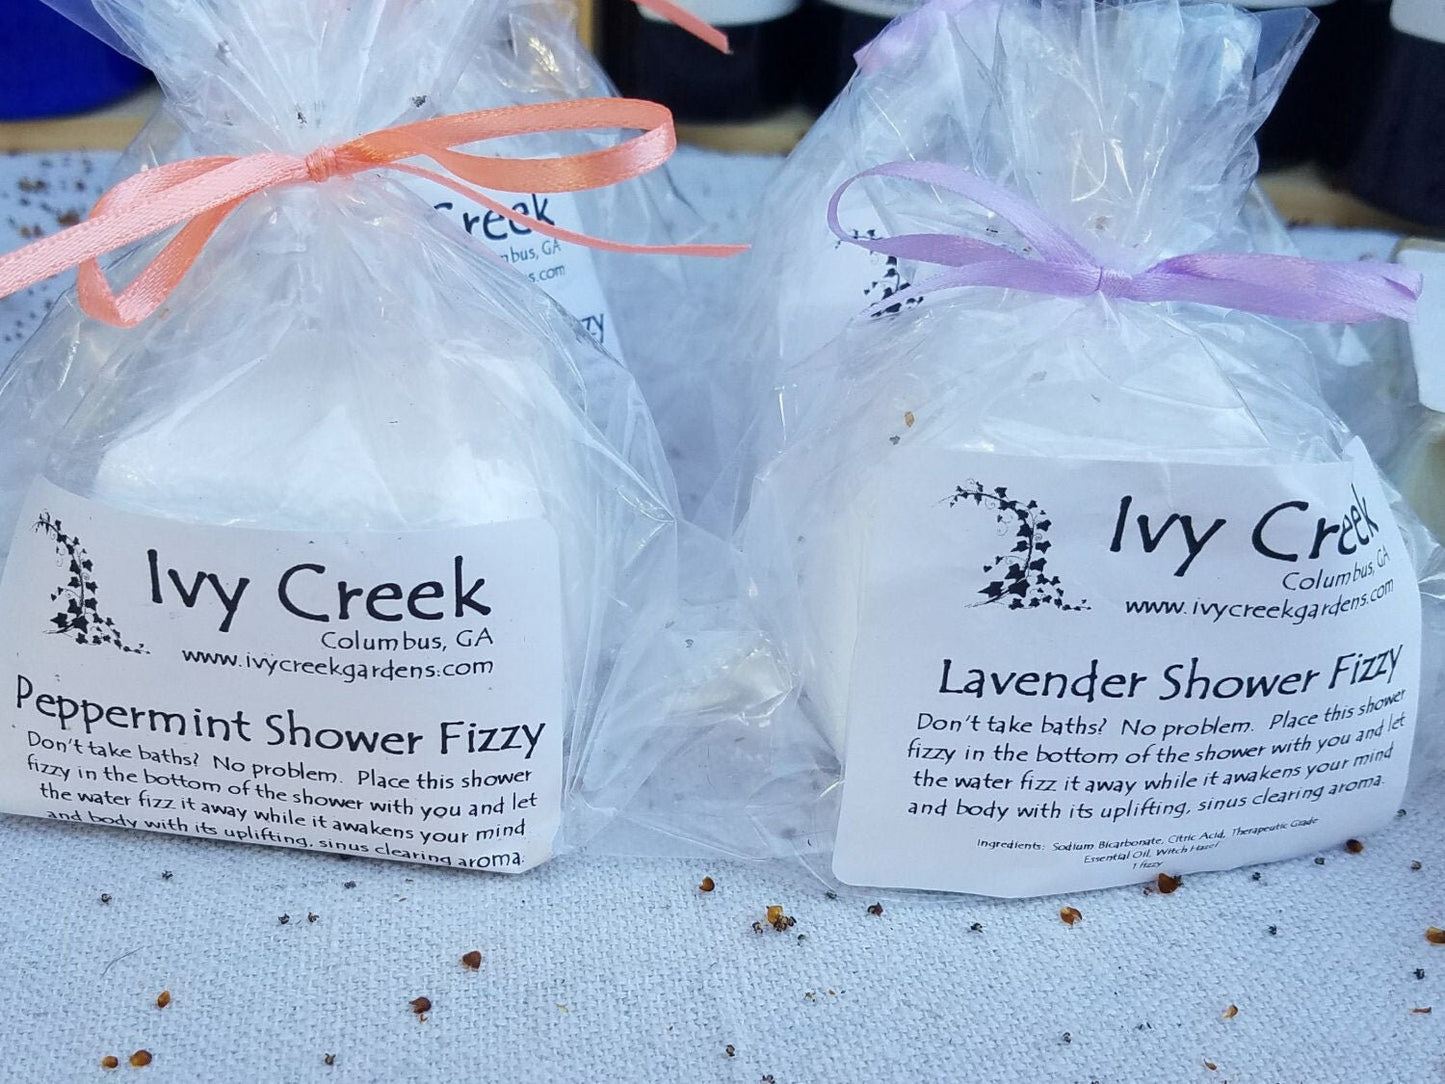 Ivy Creek Shower Fizzies, Shower Aromatherapy, Natural, Holistic, Sinus Fizzies